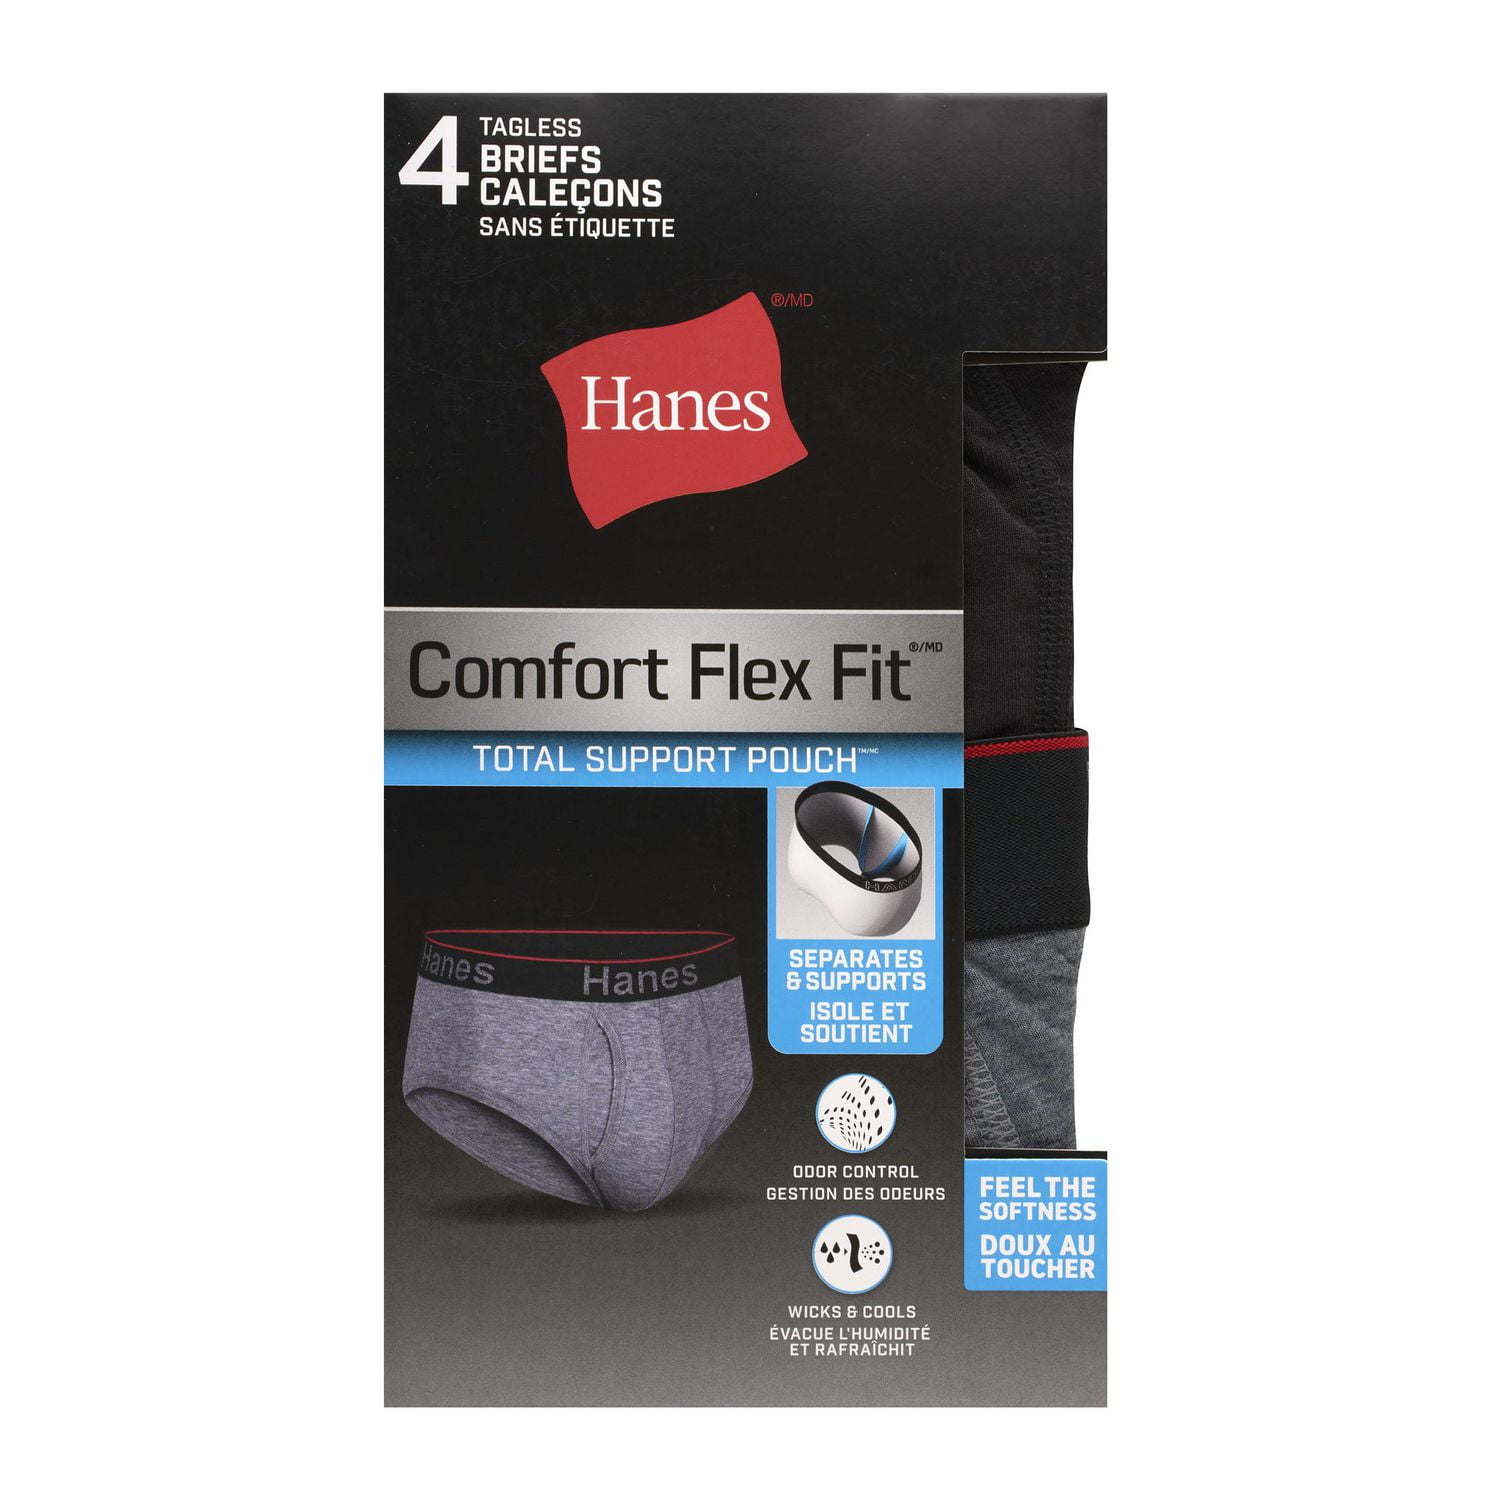 Hanes: Introducing Total Support Pouch Boxer Briefs for perfect separation  and support